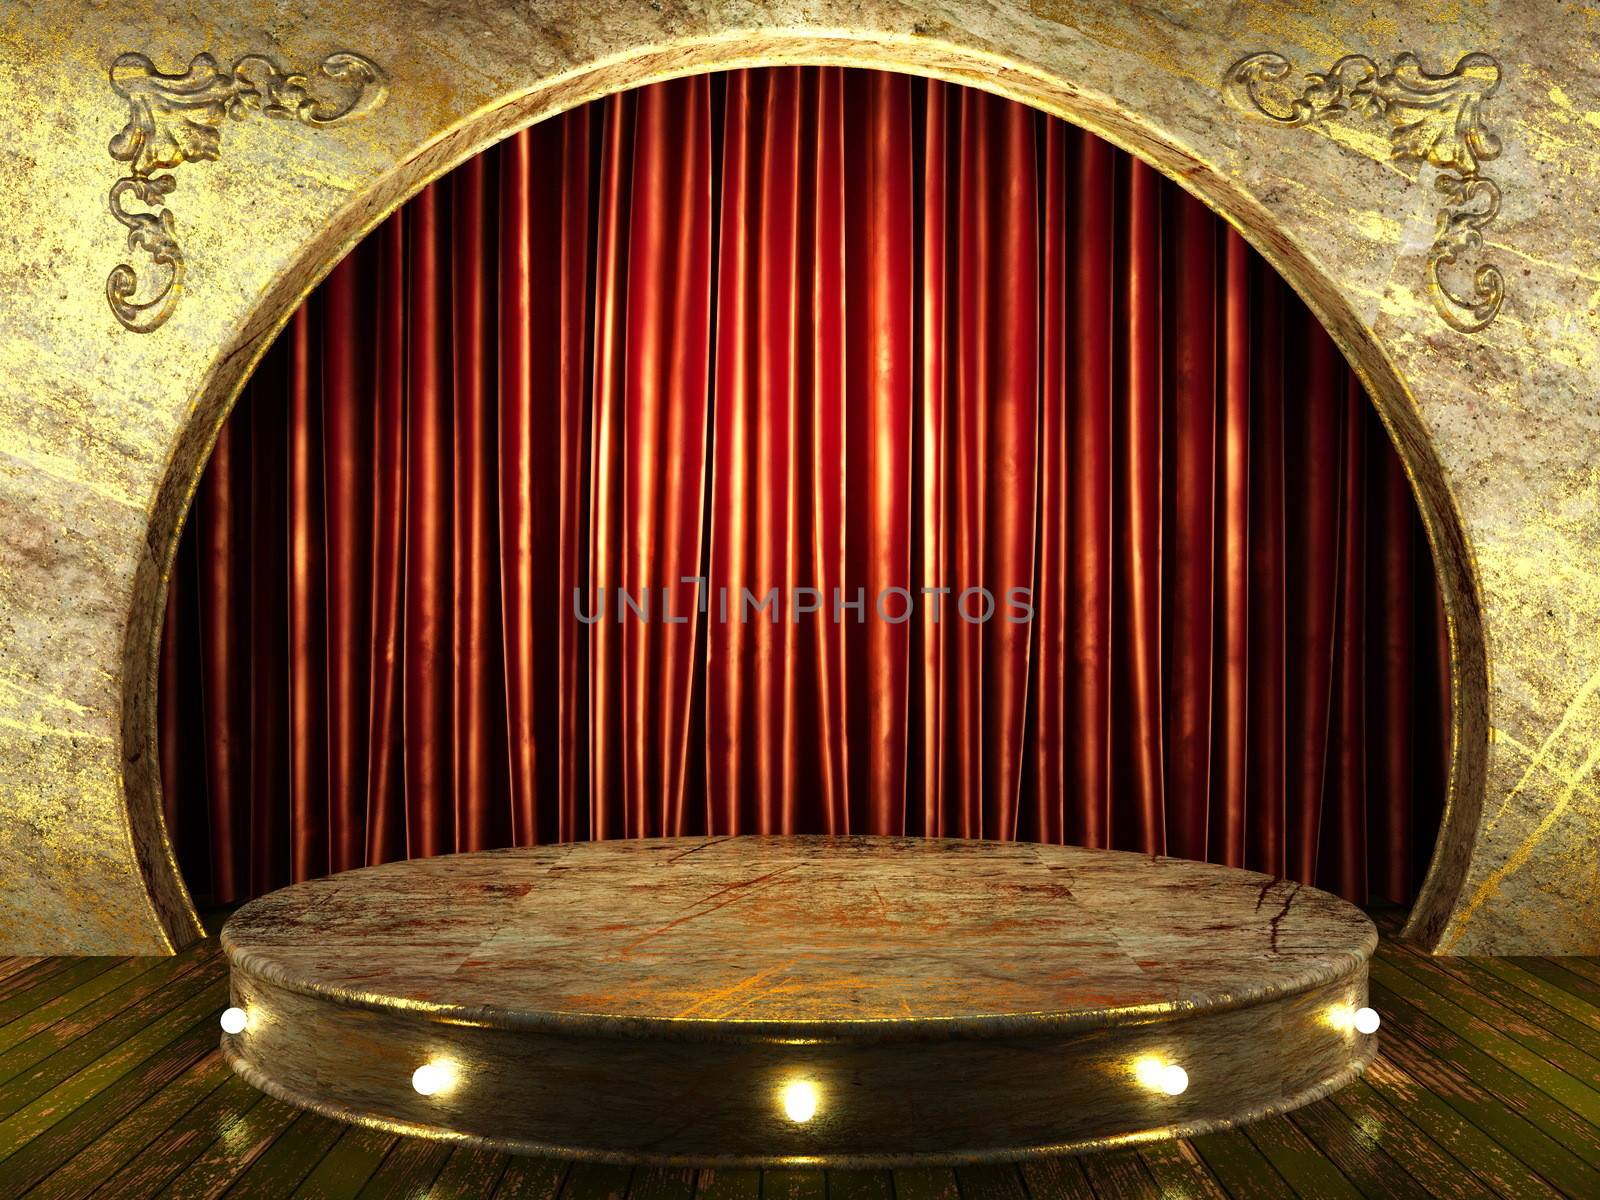 red fabric curtain on stage by videodoctor